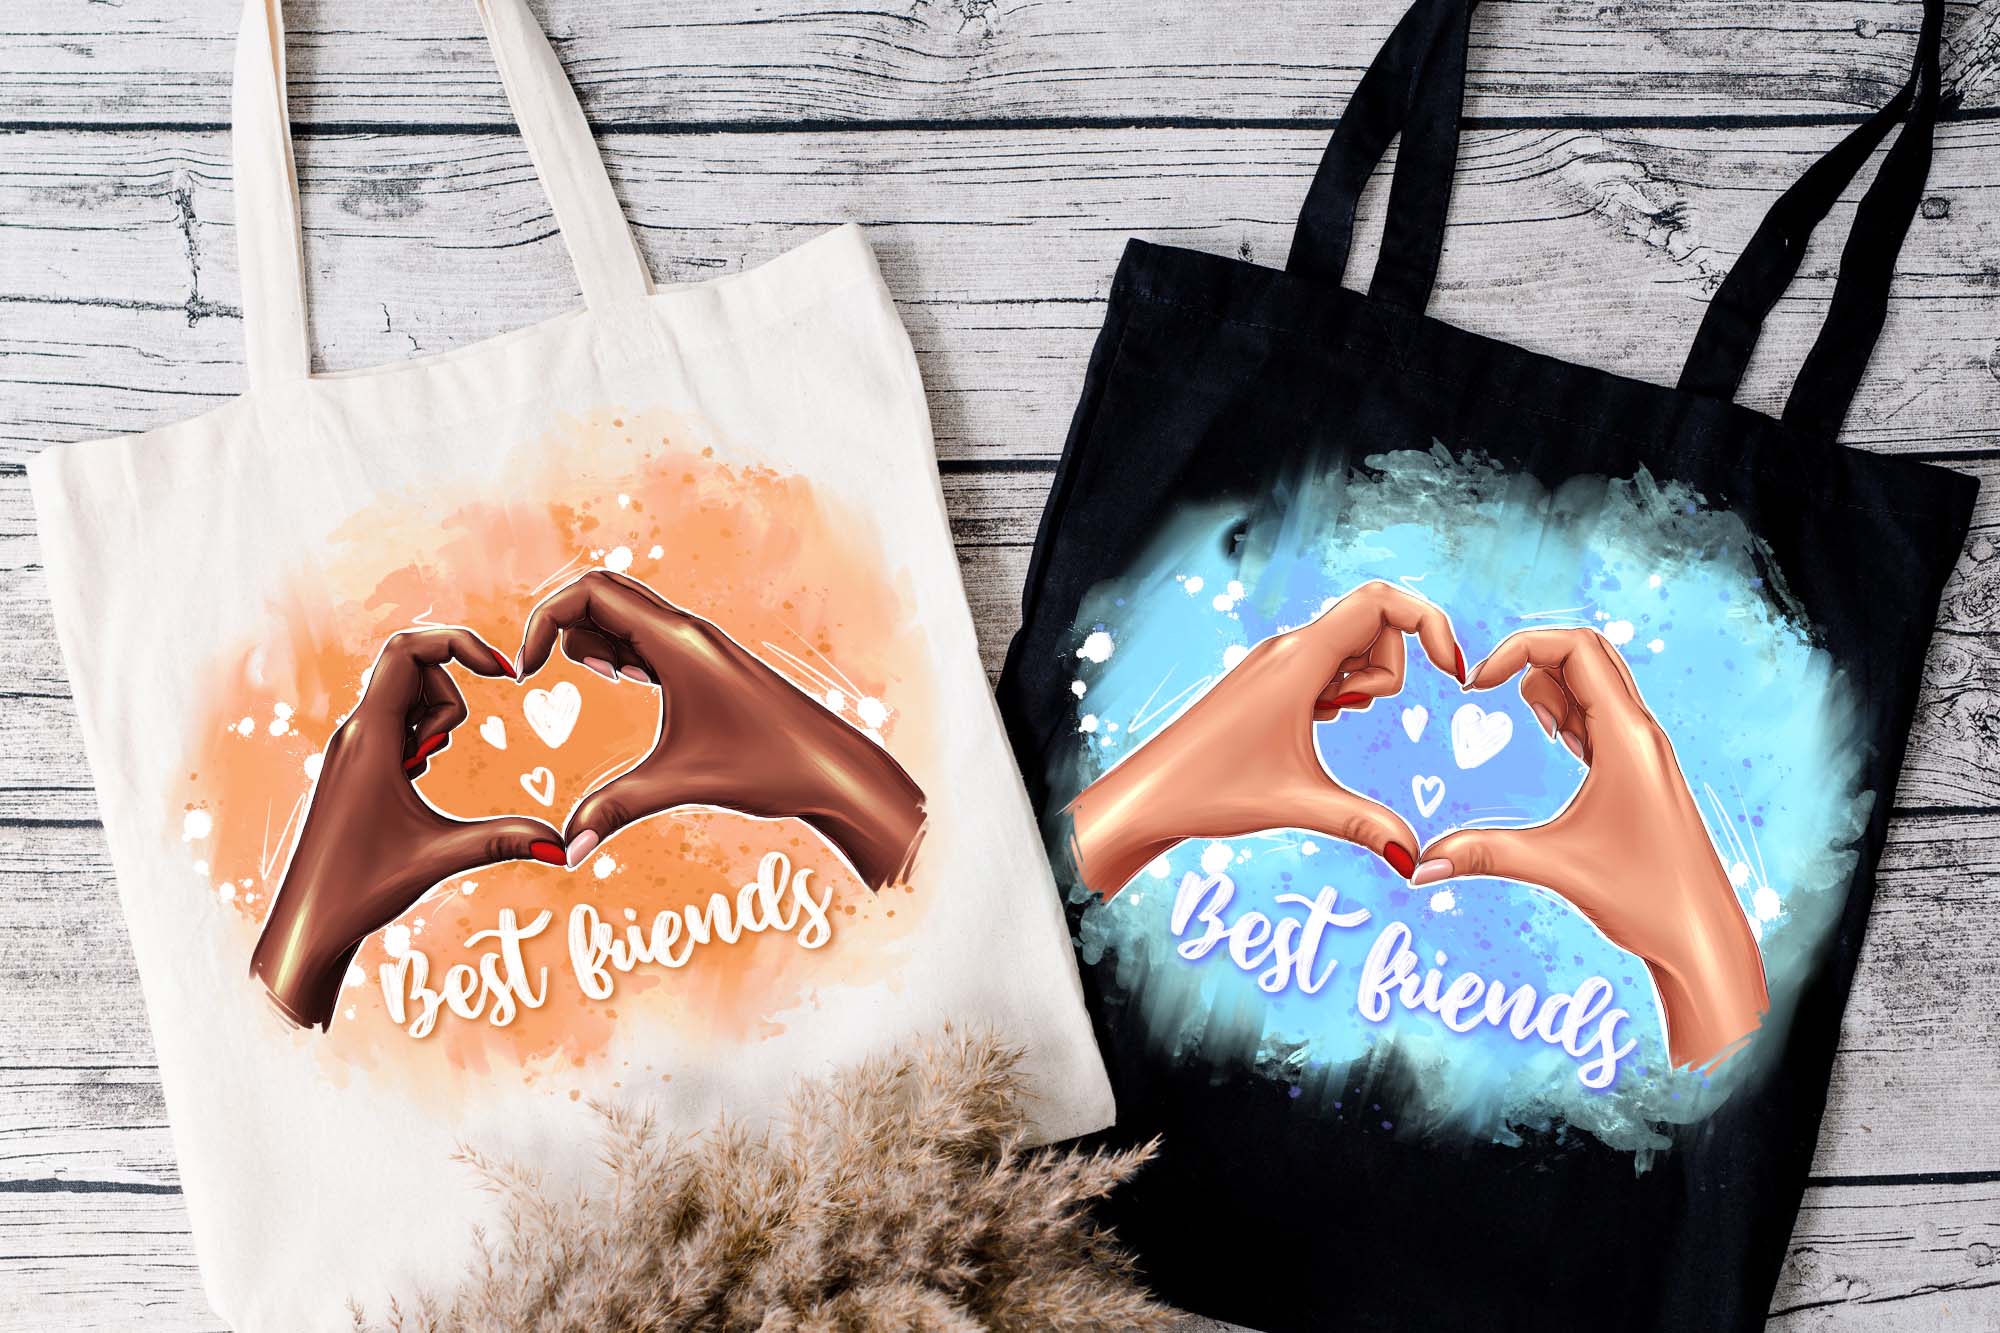 Best Friend Hands Girfrends Clipart bags mockup.